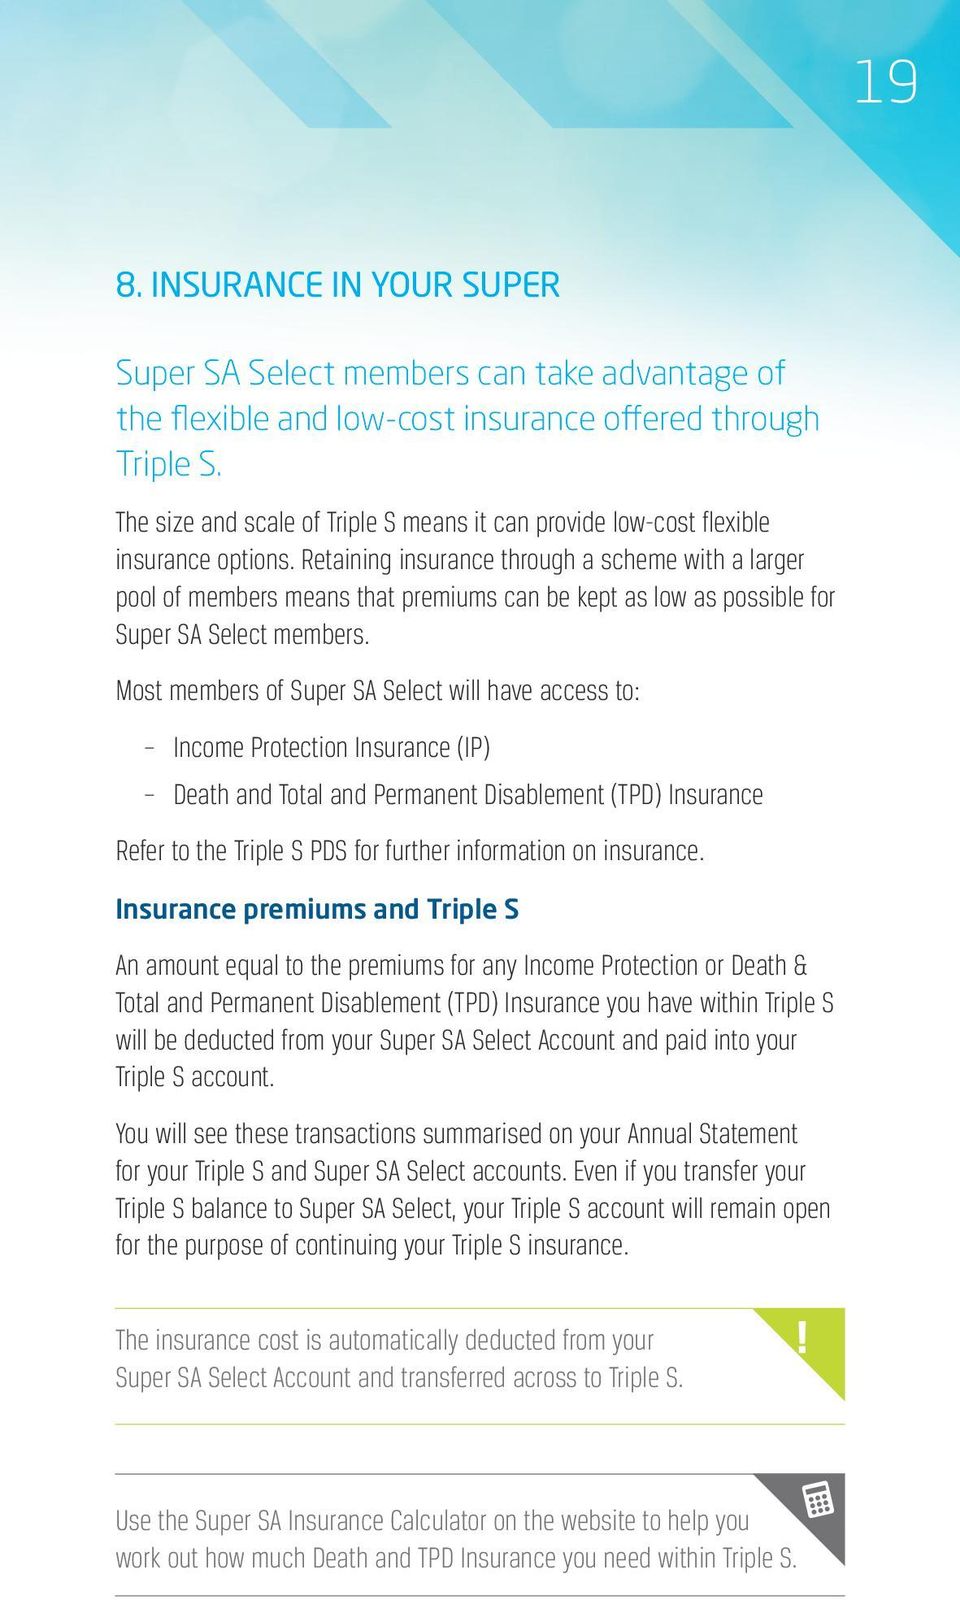 Retaining insurance through a scheme with a larger pool of members means that premiums can be kept as low as possible for Super SA Select members.